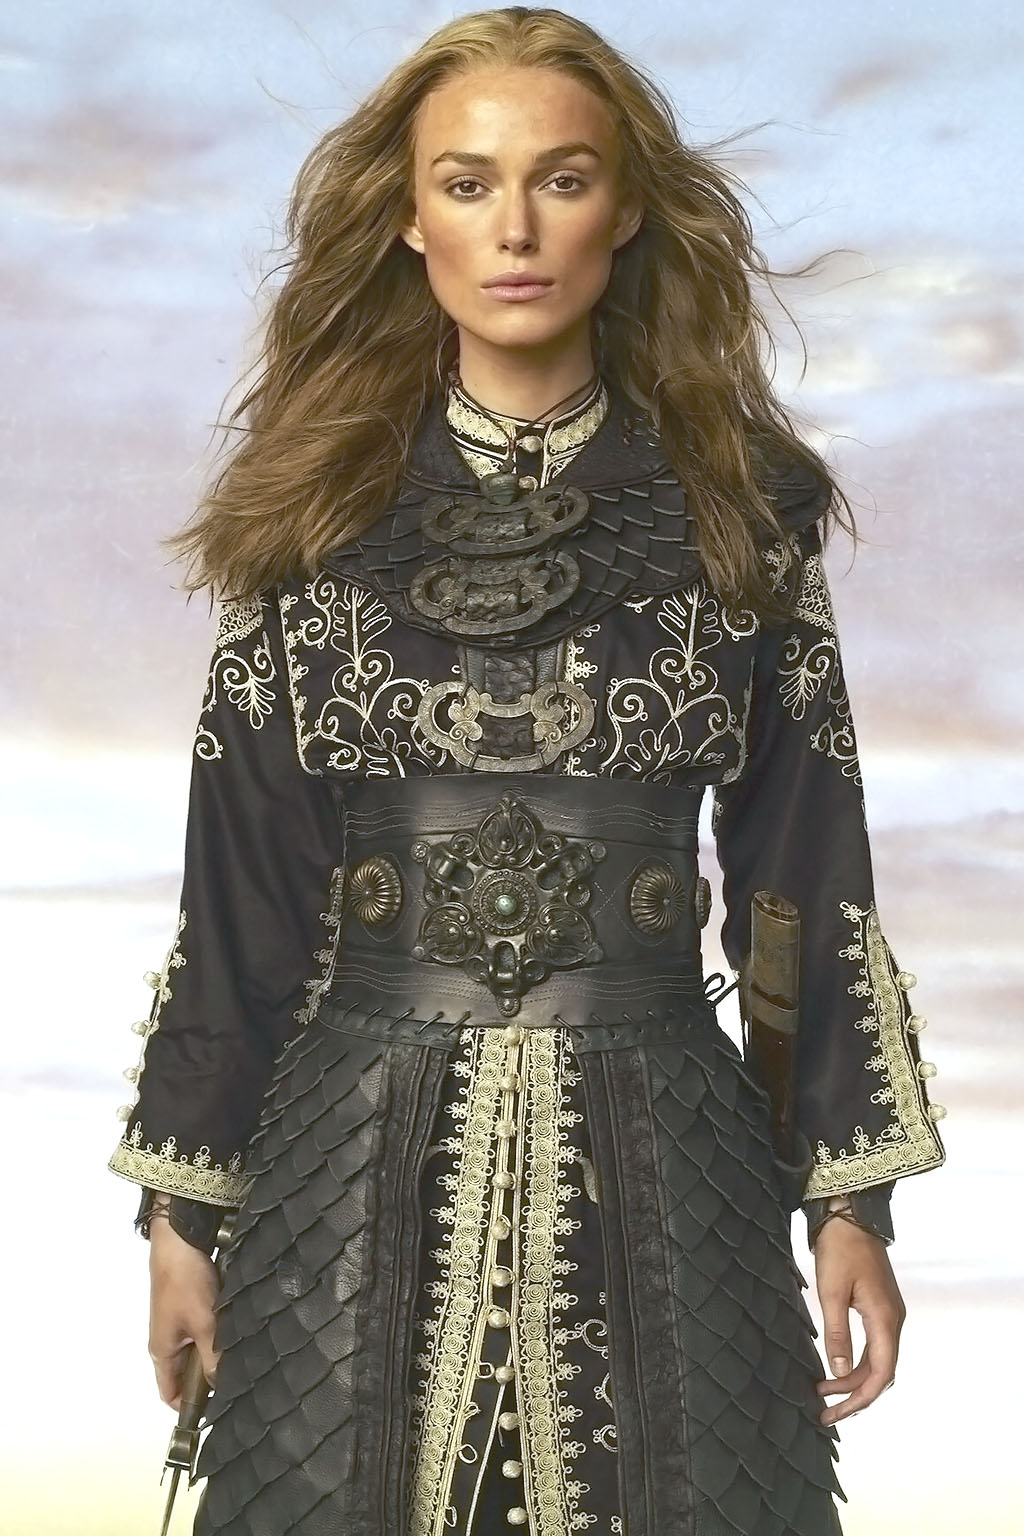 Keira Knightley posing for the promos of the movie PIRATES OF THE CARIBBEAN AT WORLDS END 